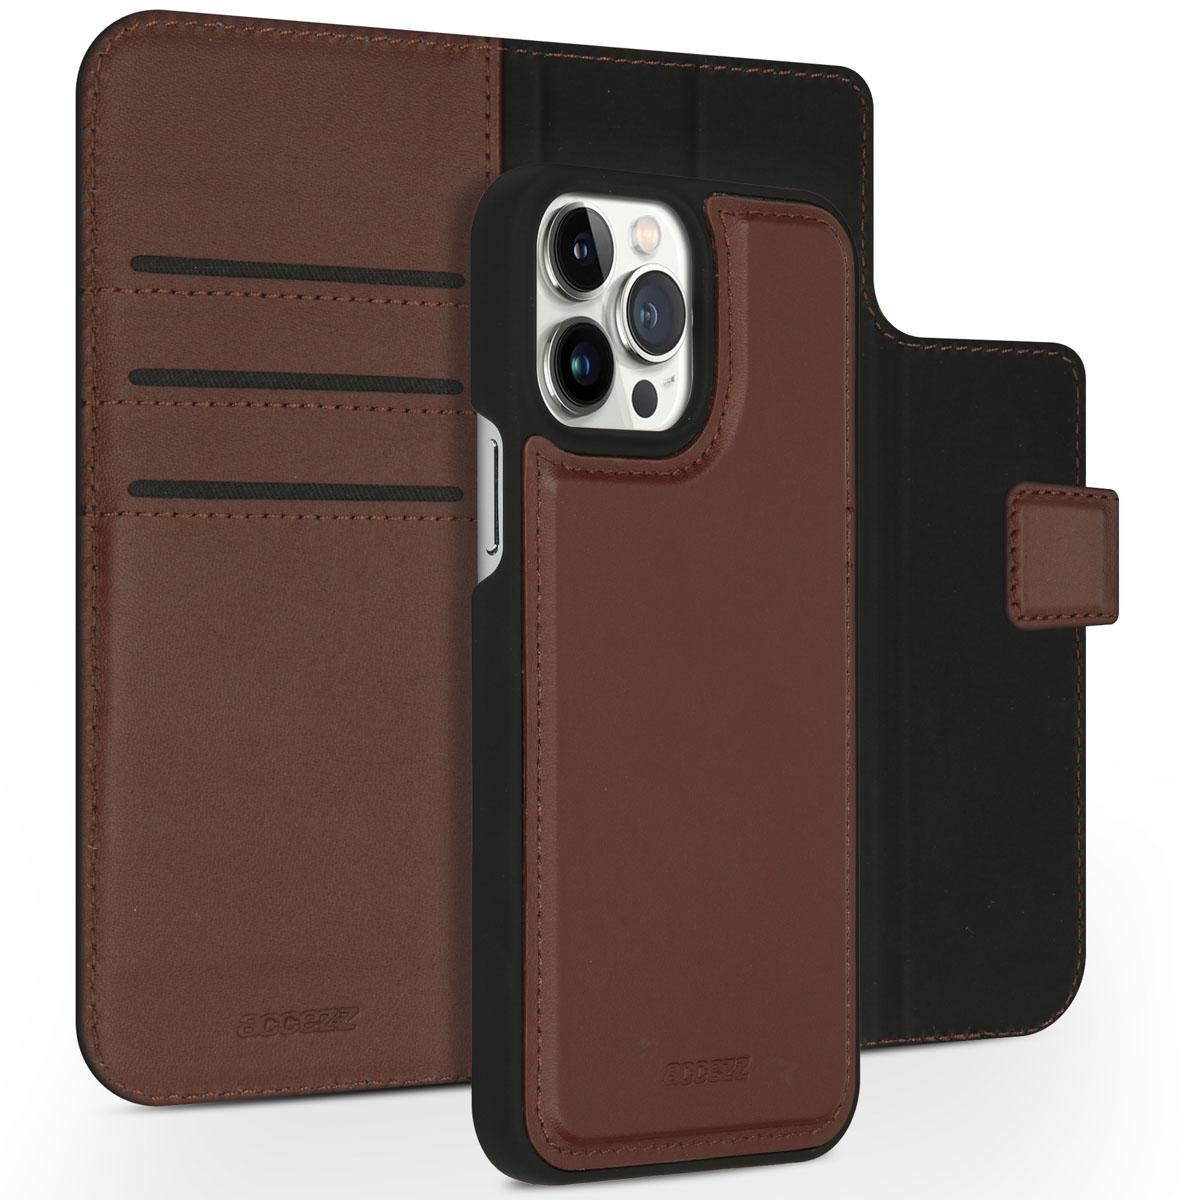 Accezz Premium Leather 2 in 1 Wallet Book Case iPhone 13 Pro Max hoesje - Bruin